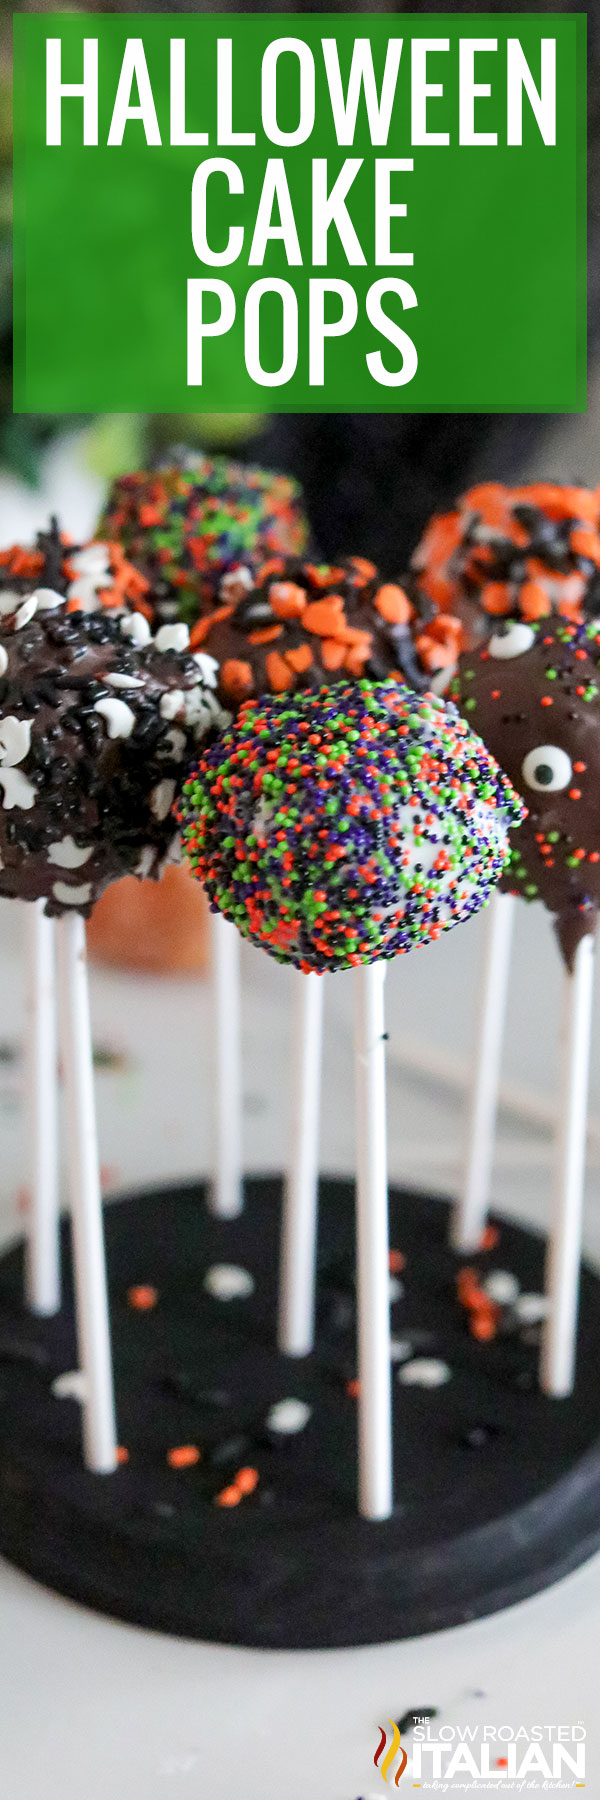 titled image (and shown): halloween cake pops